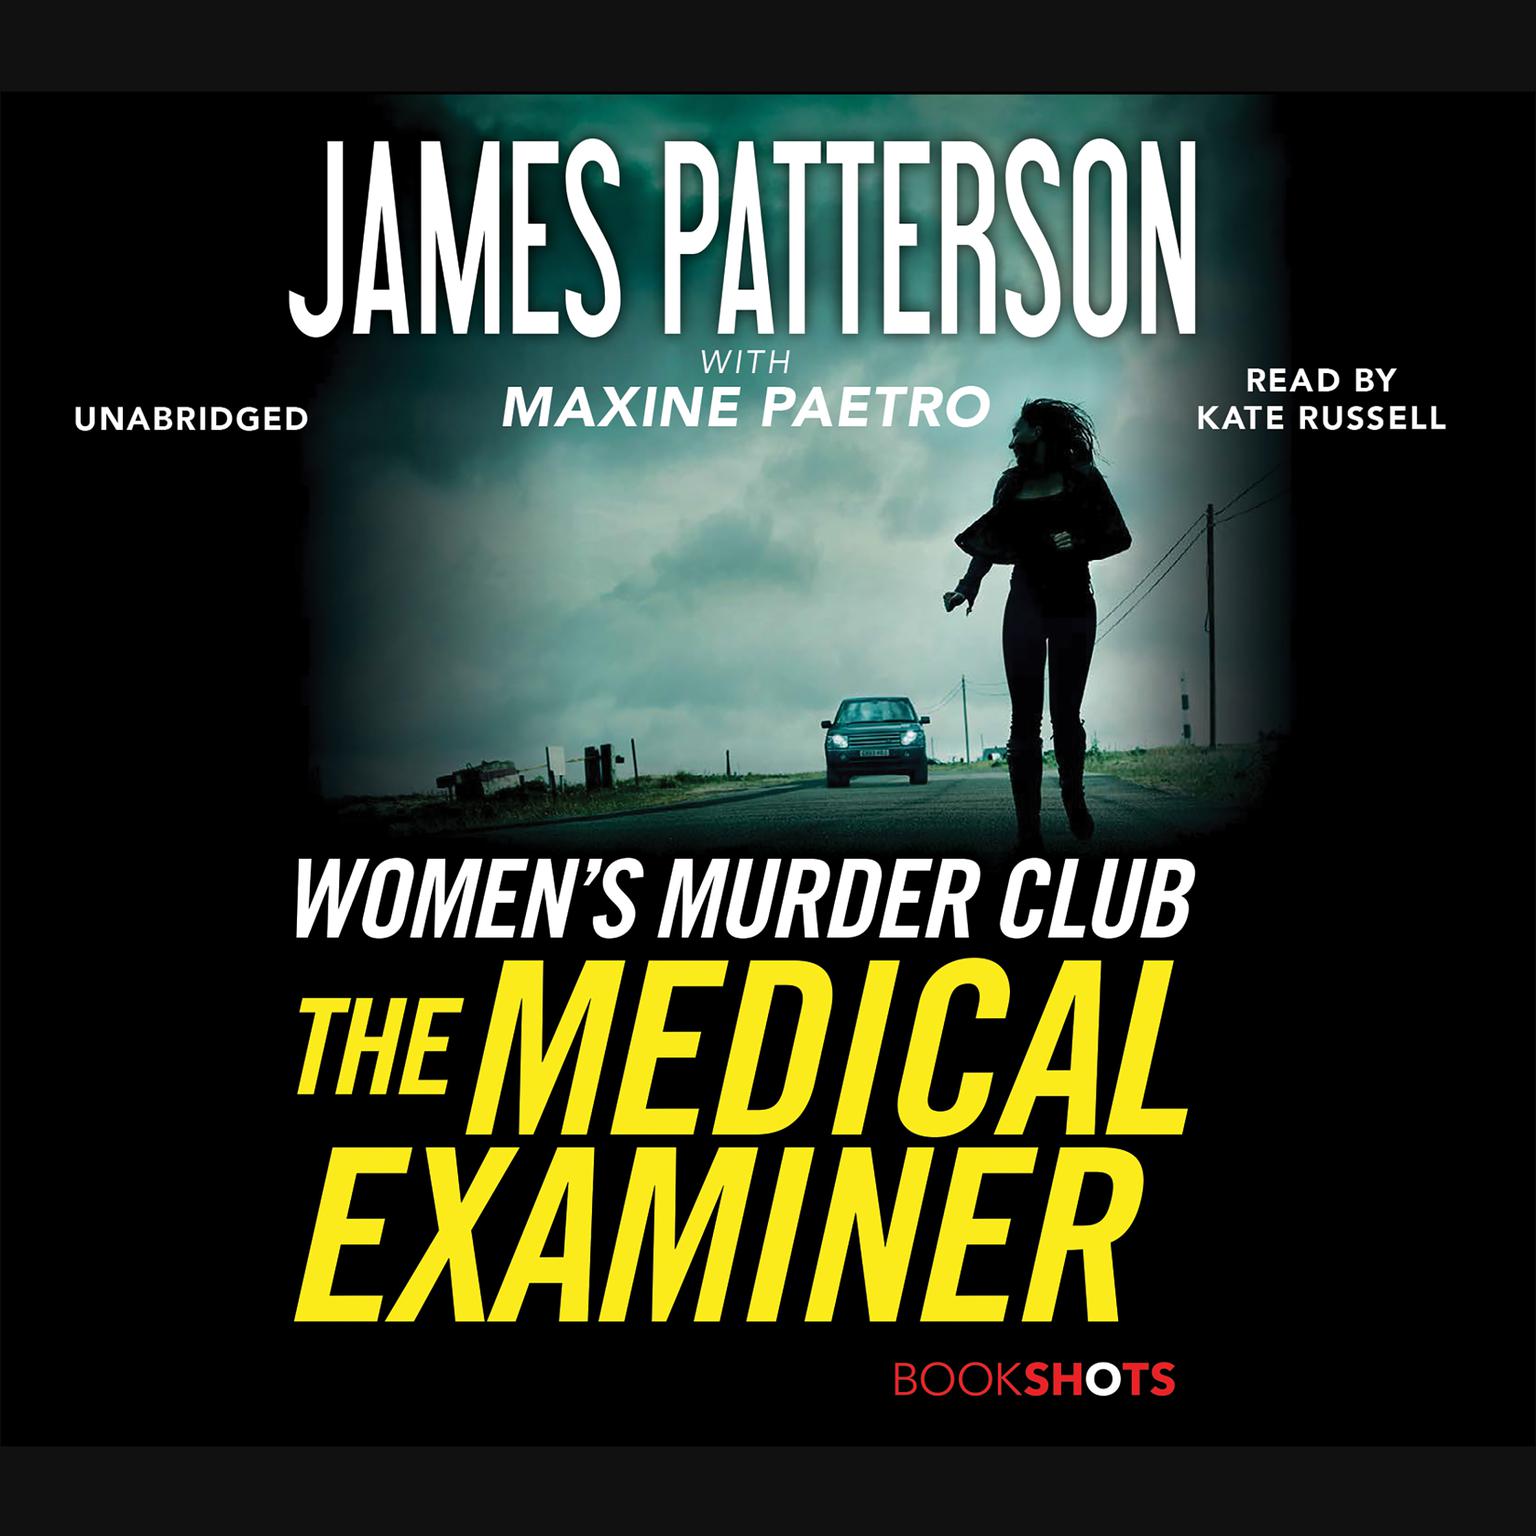 The Medical Examiner: A Womens Murder Club Story Audiobook, by James Patterson